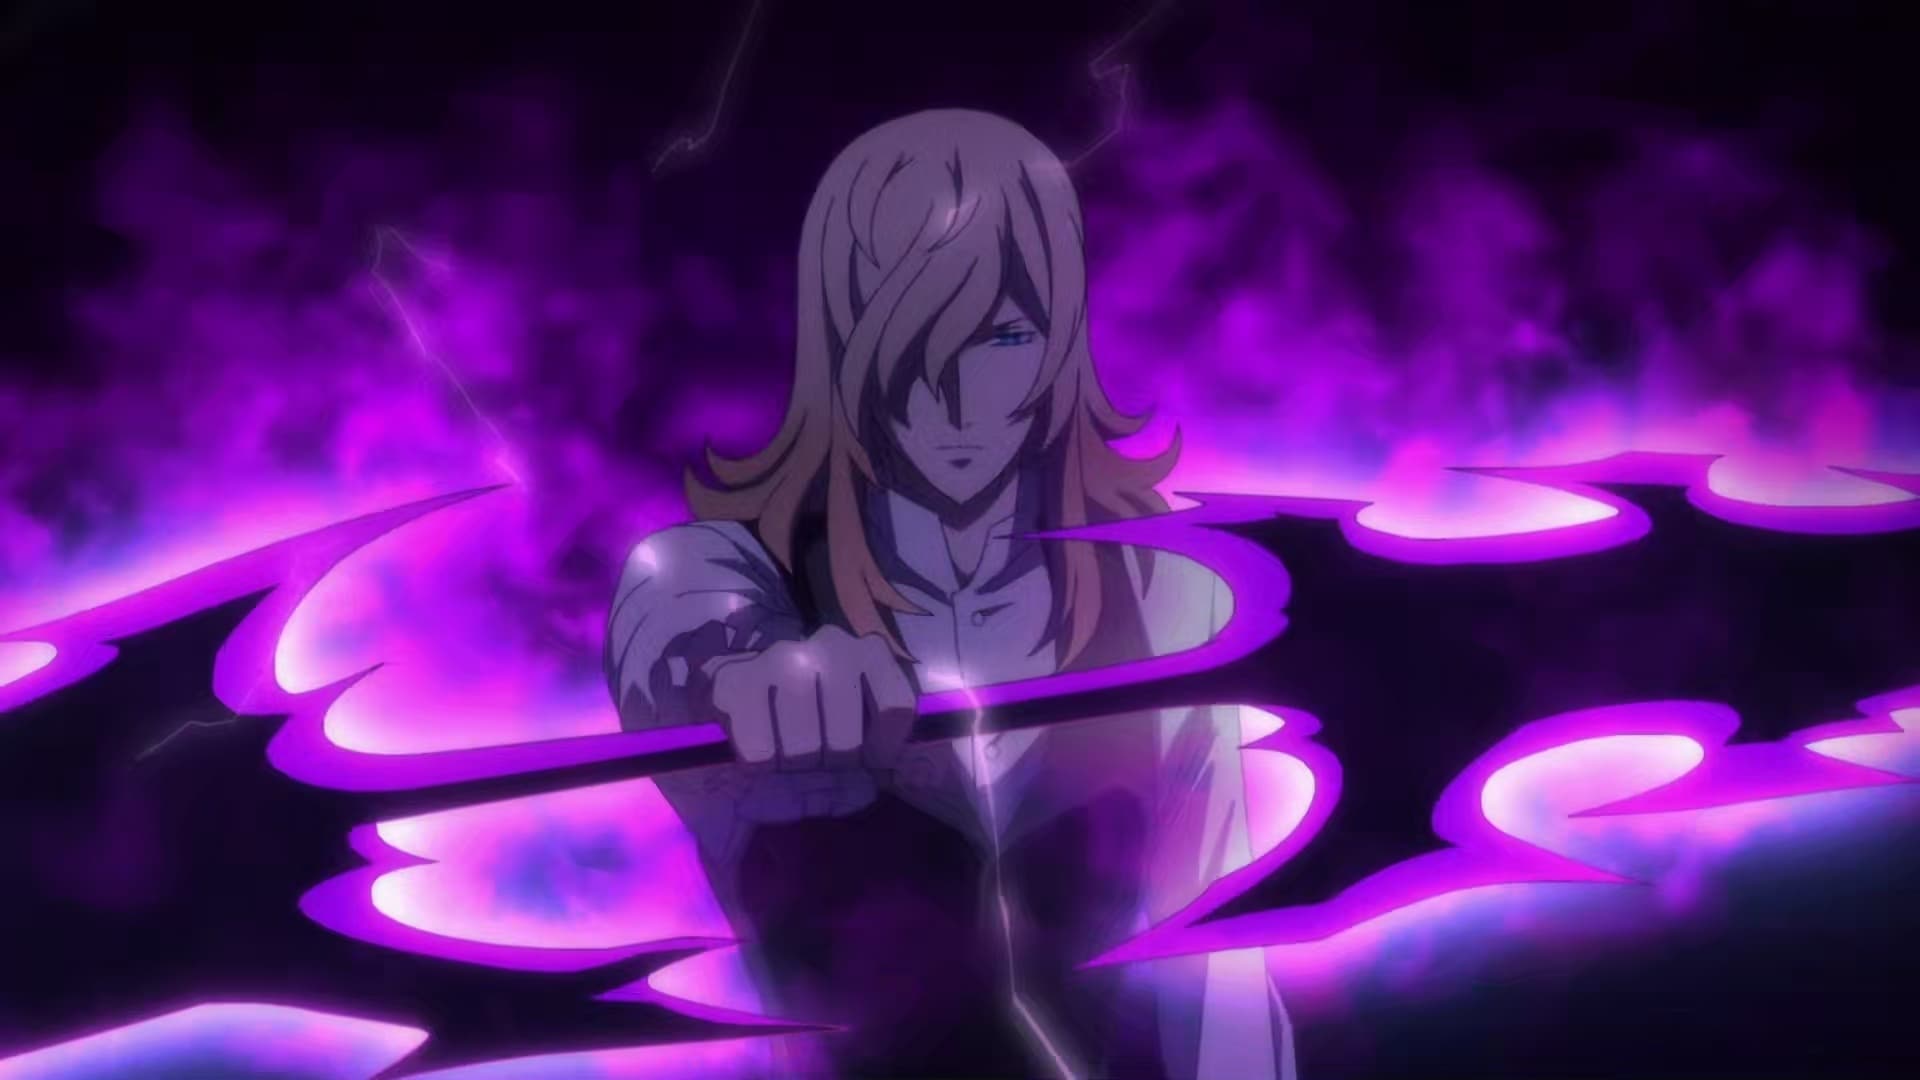 Noblesse What Must Be Protected / Ordinary - Watch on Crunchyroll